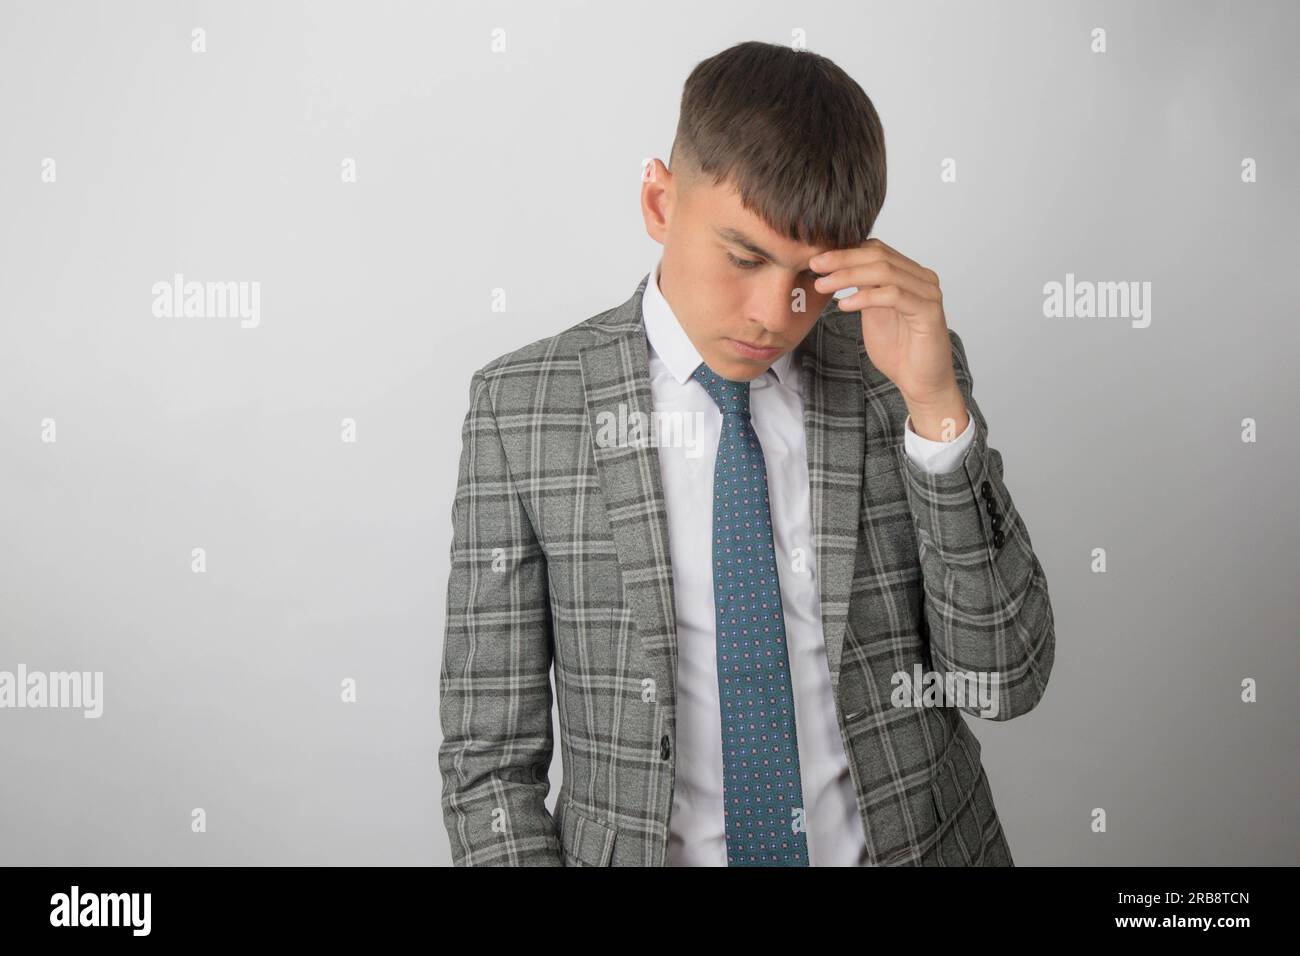 Young entrepreneur wearing a suit and tie rubbing his head with stress Stock Photo